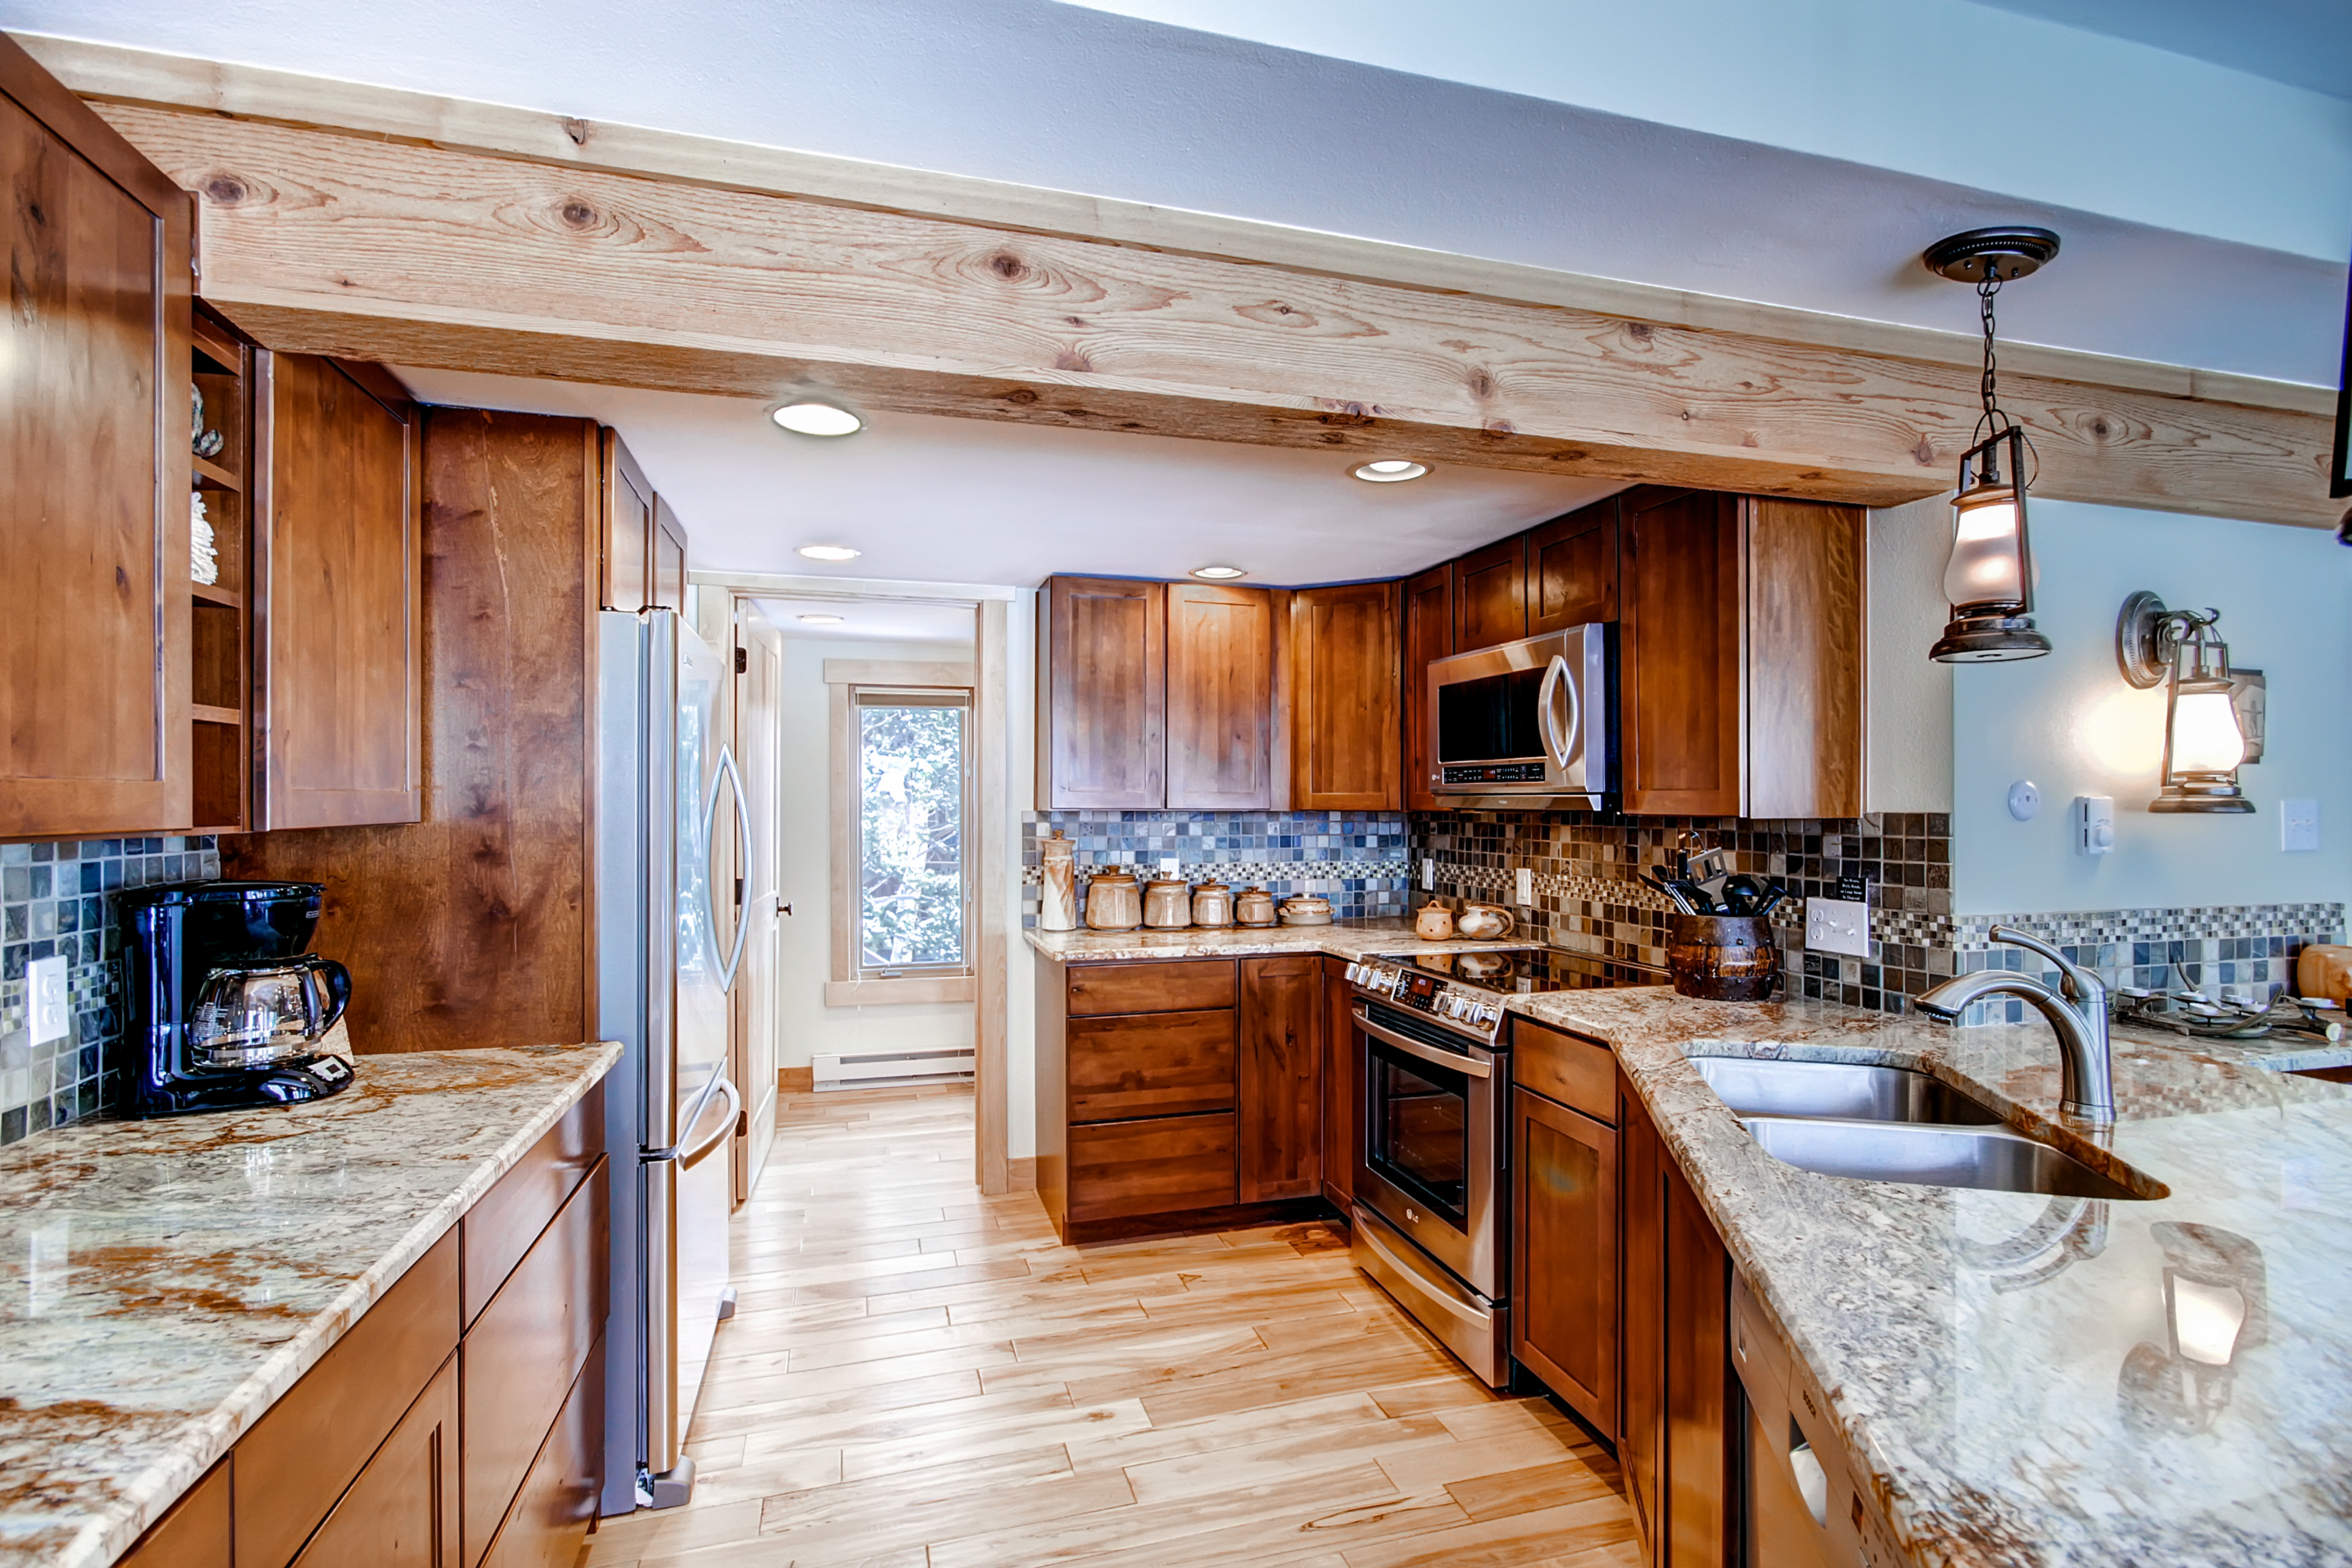 Additional view of the spacious cozy kitchen - 4 O’Clock Lodge D26 Breckenridge Vacation Rental